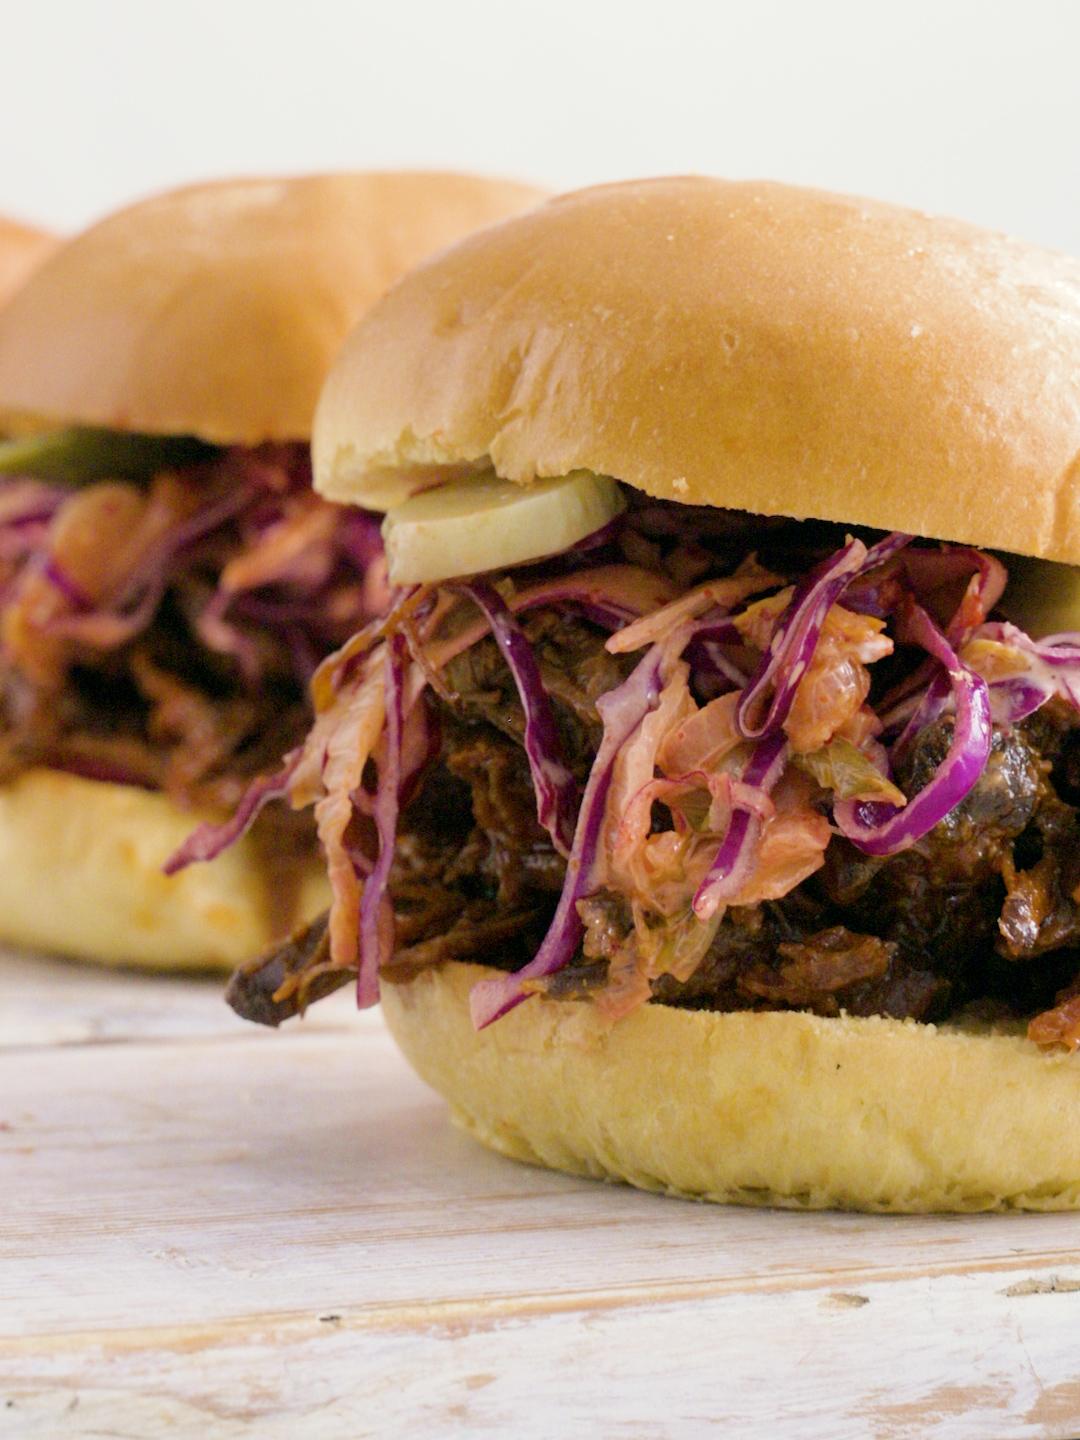 Brisket Sandwich with Chipotle Barbecue Sauce and Kimchi Slaw